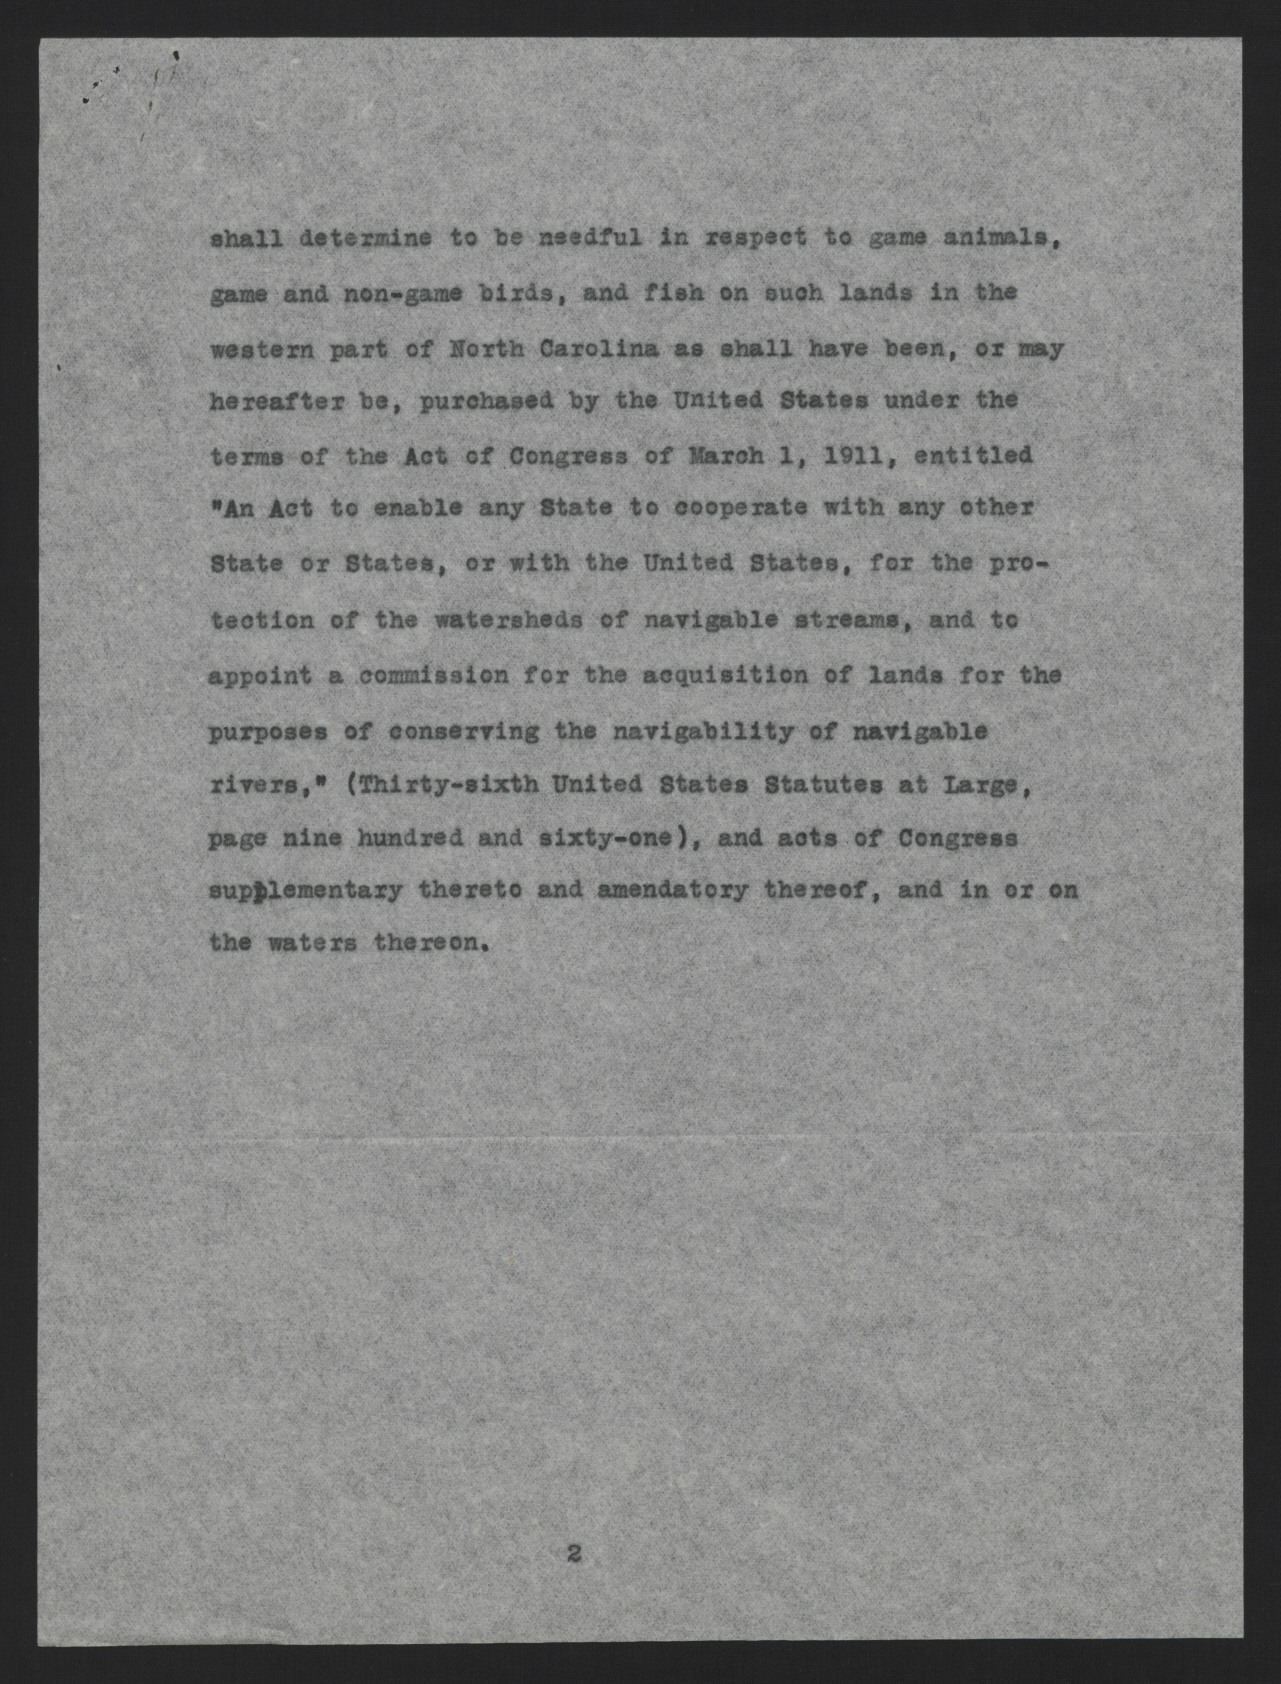 Proposed Act of the North Carolina General Assembly, circa January 1915, page 2